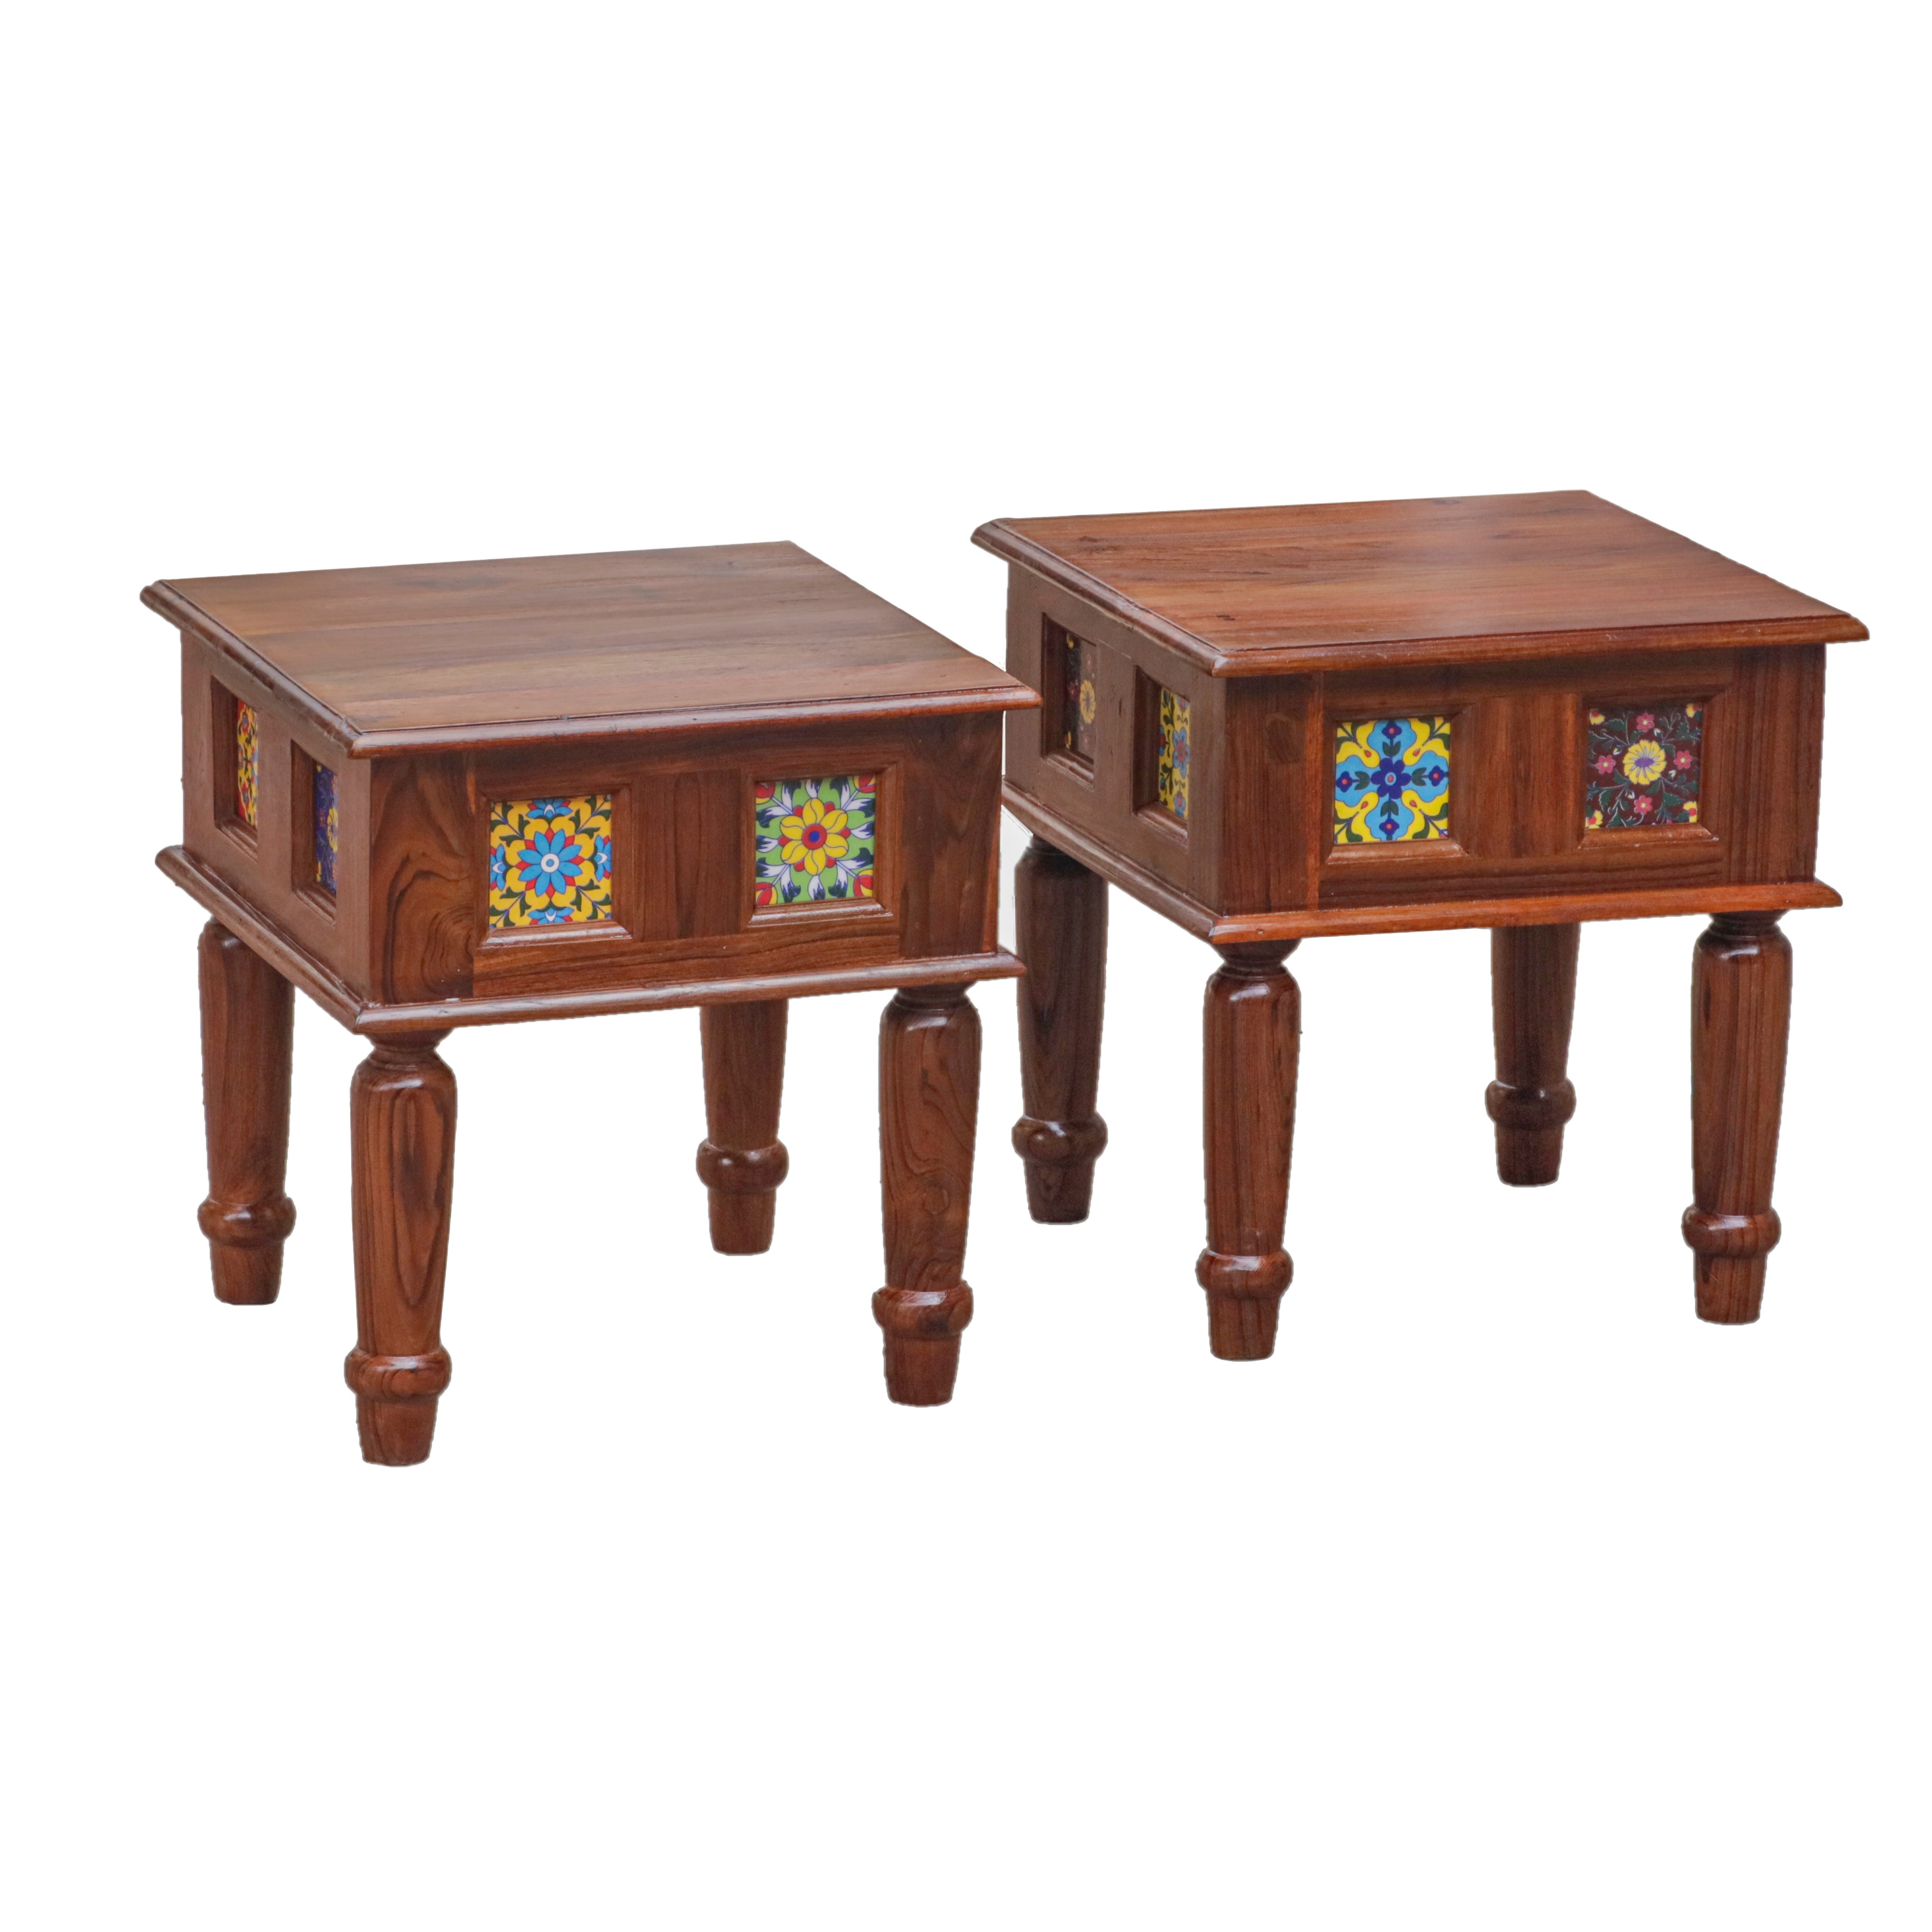 Aesthetic Round Leg Vintage Small Wooden Table with Tile (Set of 2) Bedside